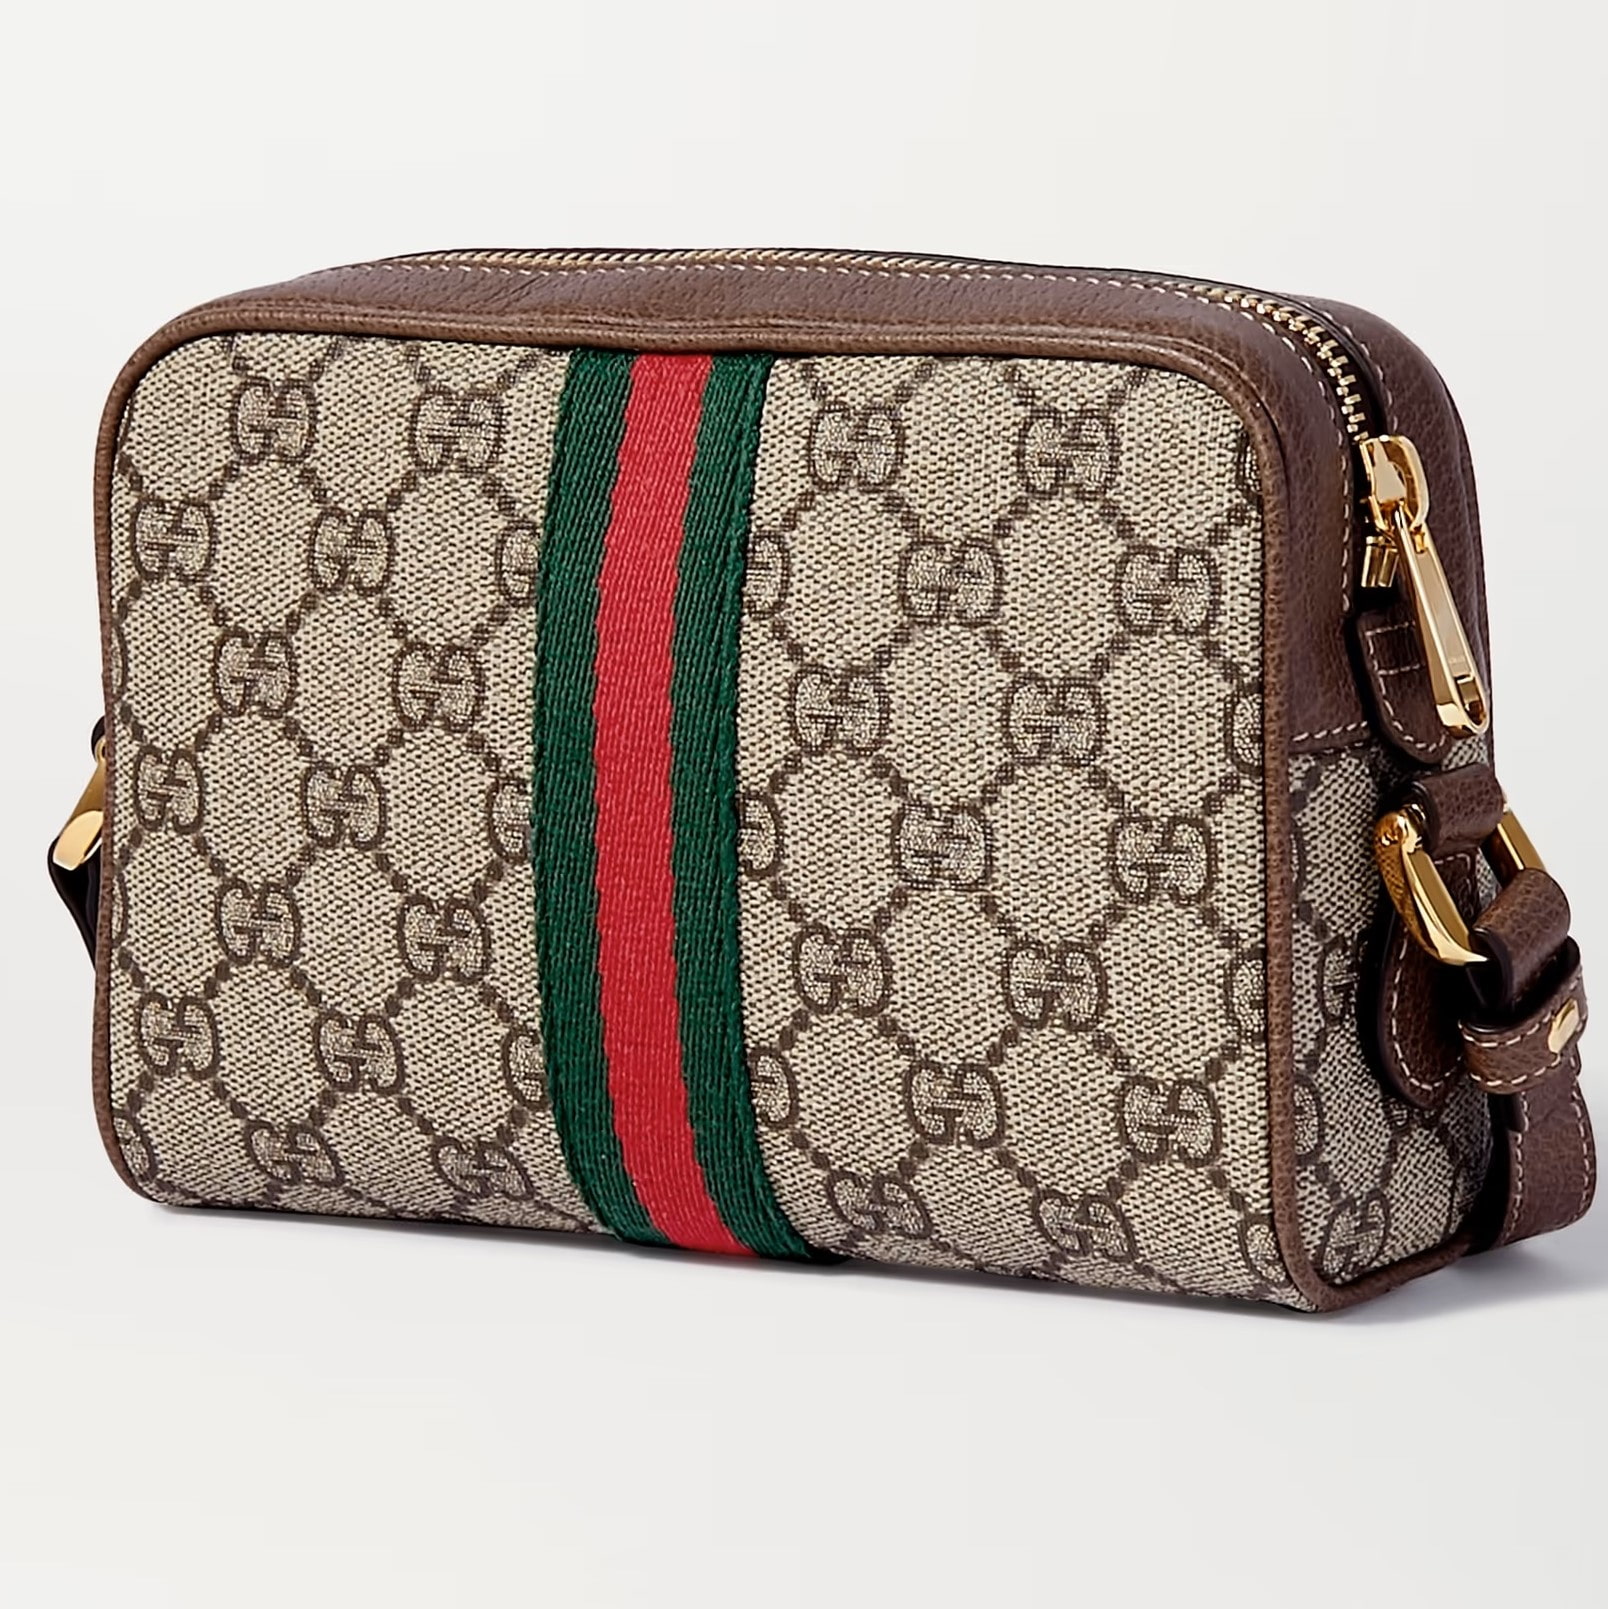 TÚI ĐEO CHÉO GUCCI OPHIDIA SMALL BEIGE LEATHER TRIMMED PRINTED COATED CANVAS CAMERA BAG 4